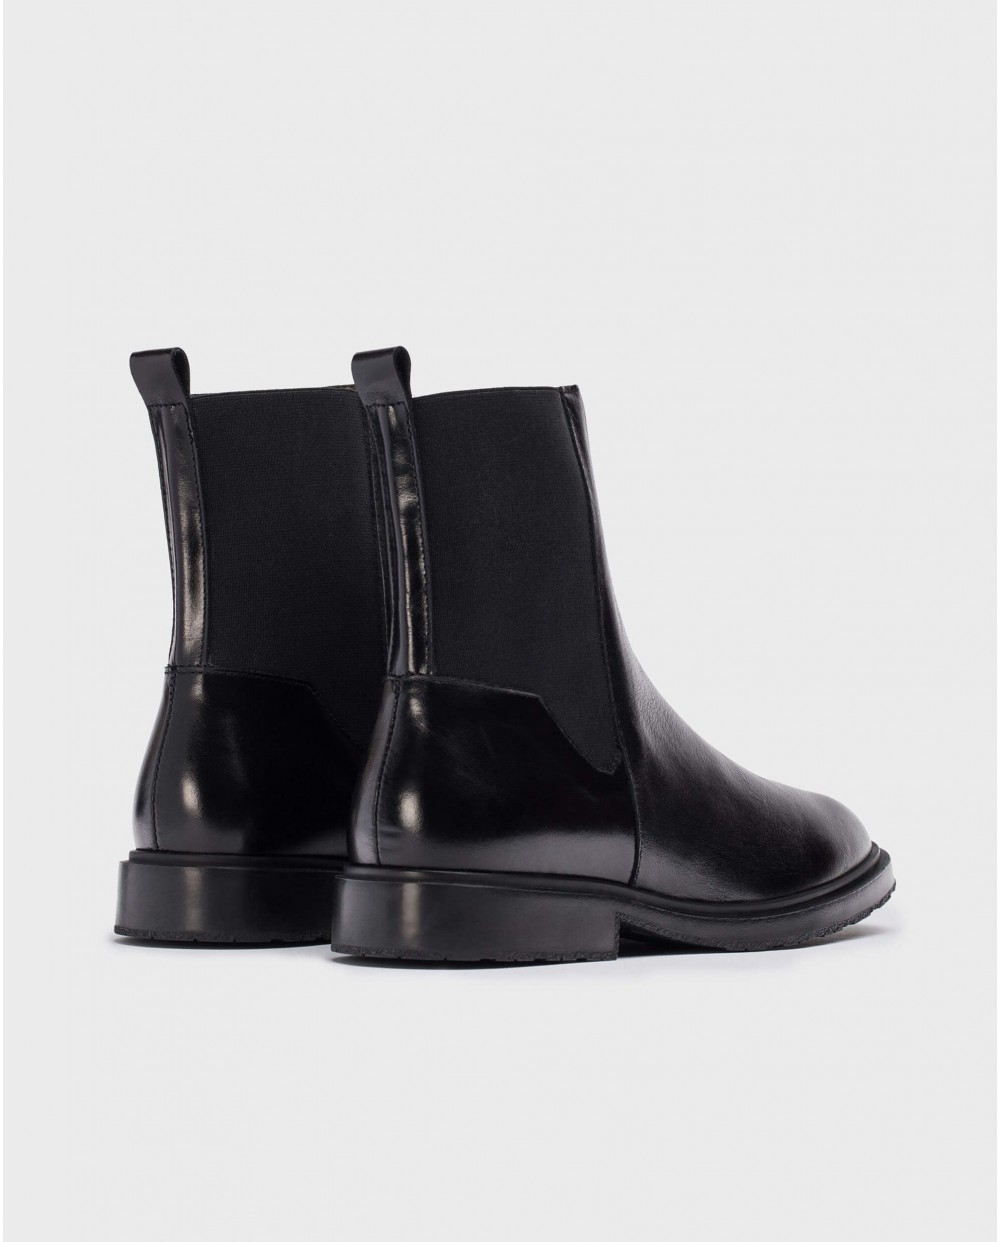 Wonders-Ankle Boots-Black SCAR ankle boot